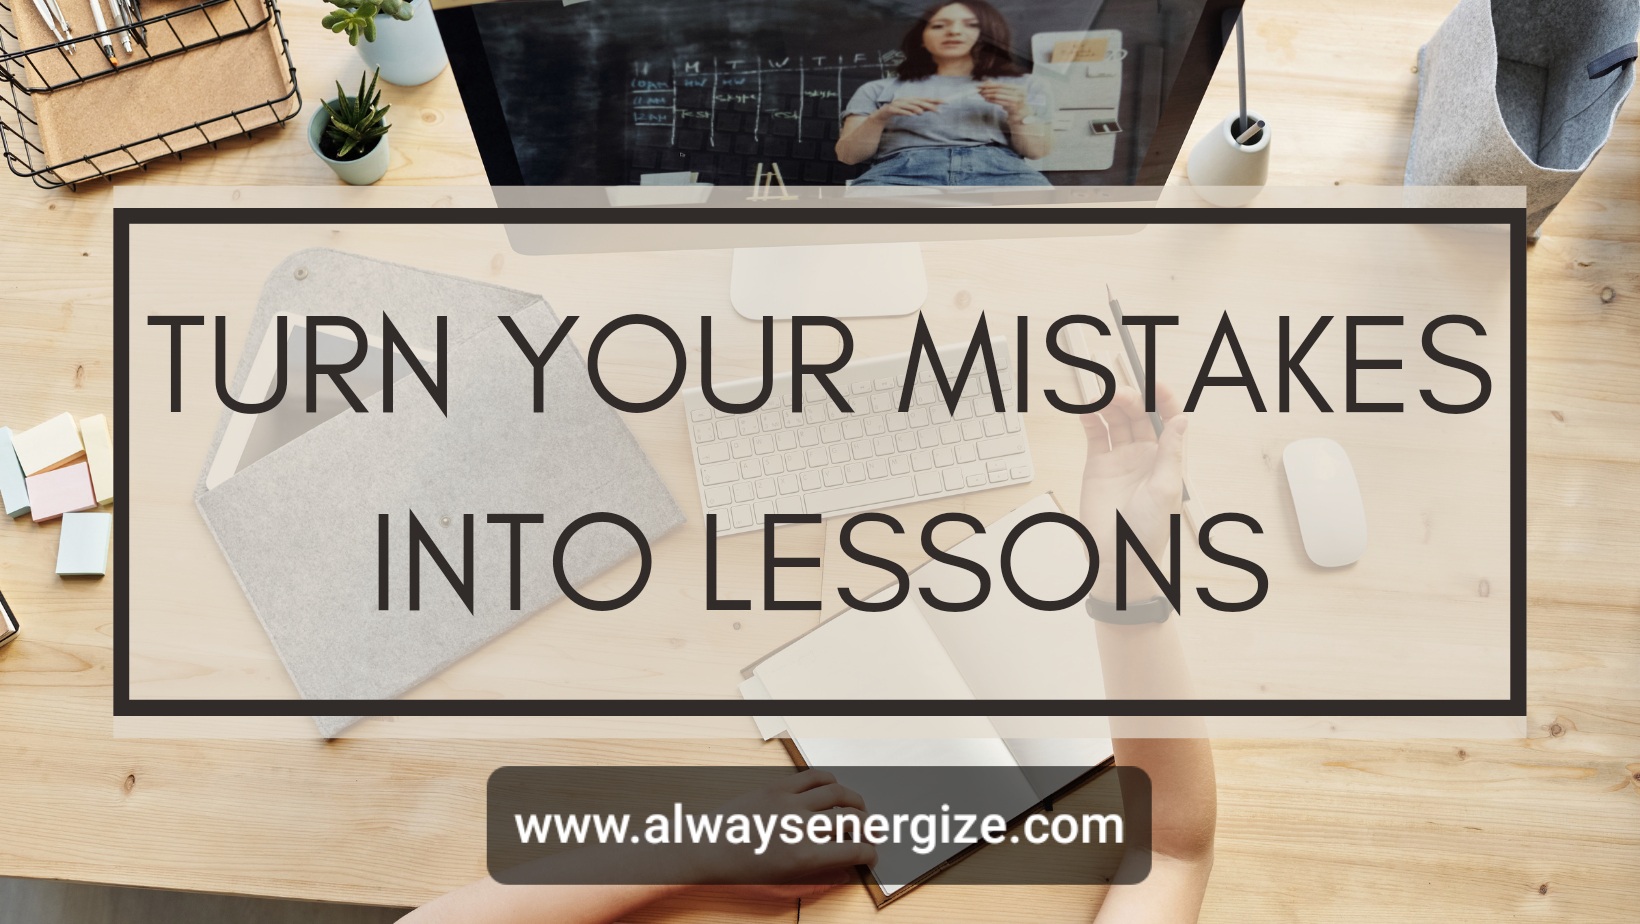 Turn Your Mistakes Into Lessons